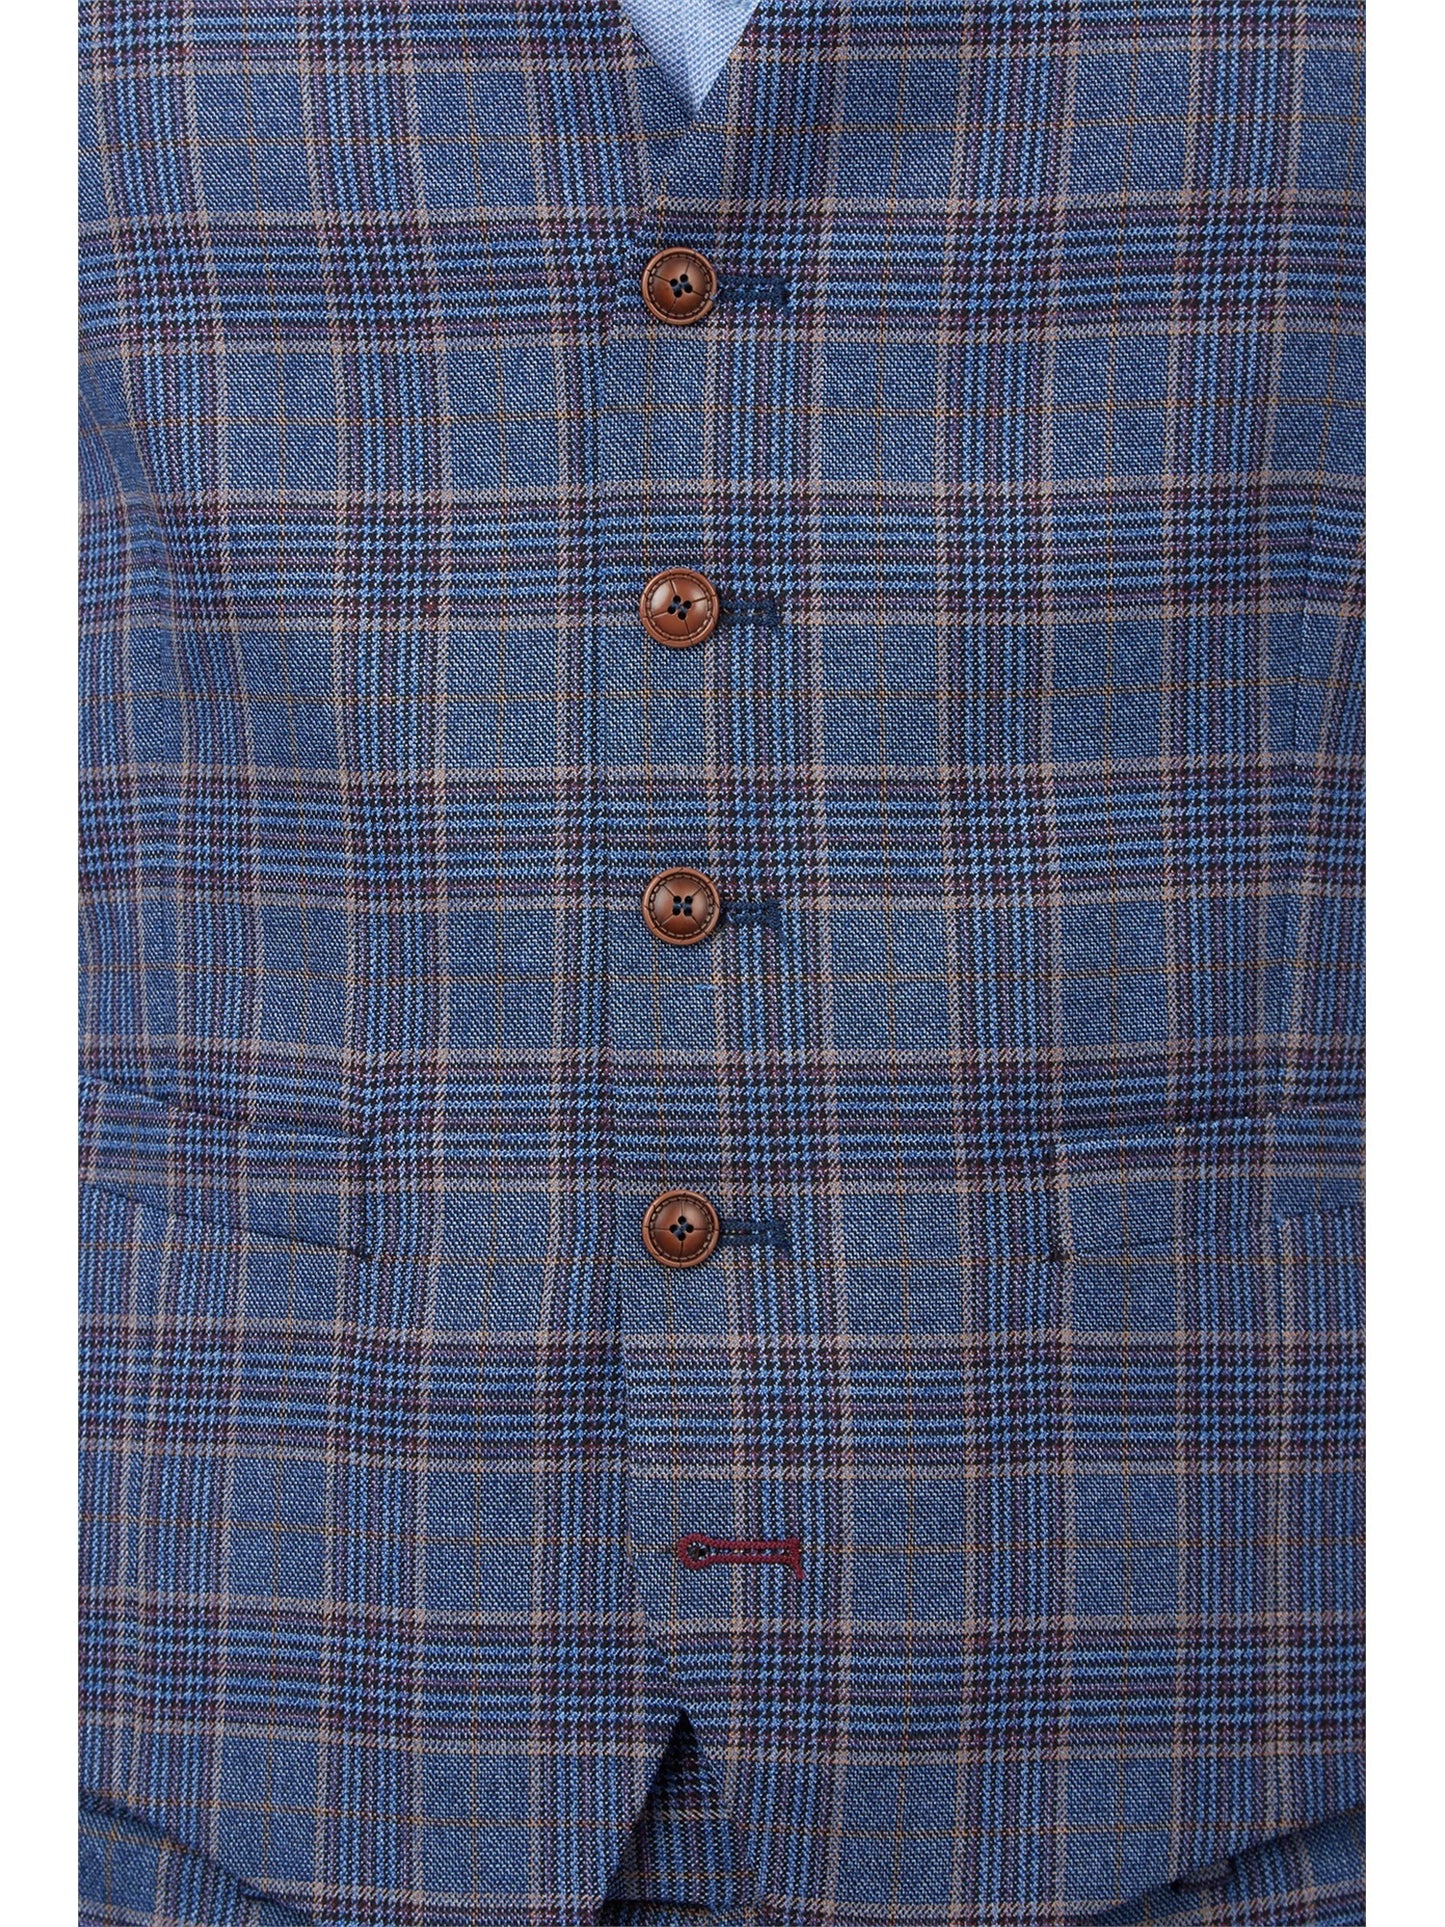 Blue Over Check from Antique Rogue - Waistcoat